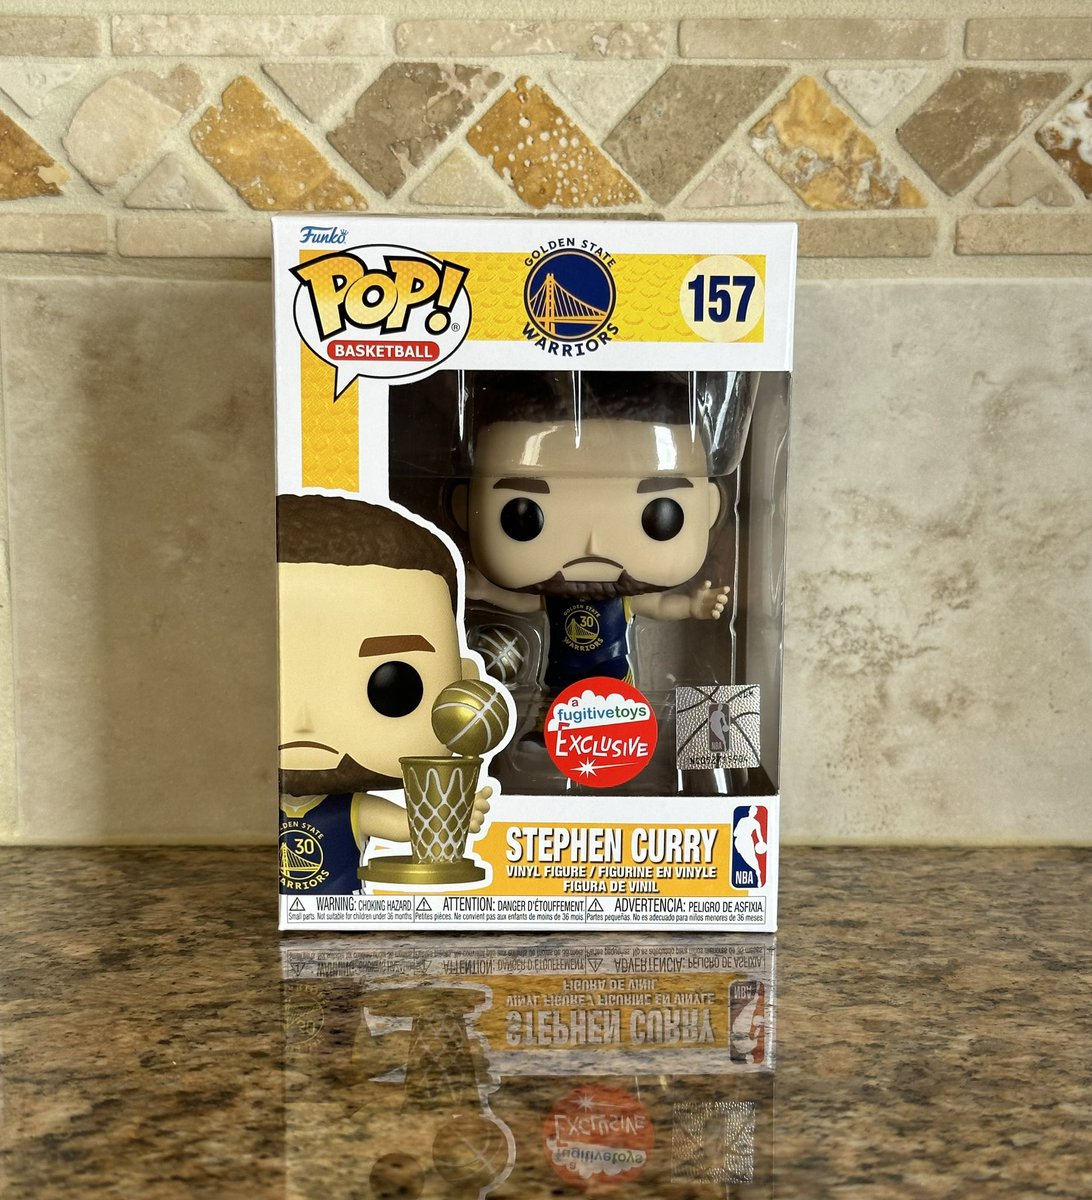 Mail Call! Got my @fugitivetoys exclusive Stephen Curry Pop!
.
#StephenCurry #StephCurry #NBA  #Warriors #GoldenStateWarriors #Funko #FunkoPop #FunkoPopVinyl #Pop #PopVinyl #Collectibles #Collectible #DisTrackers